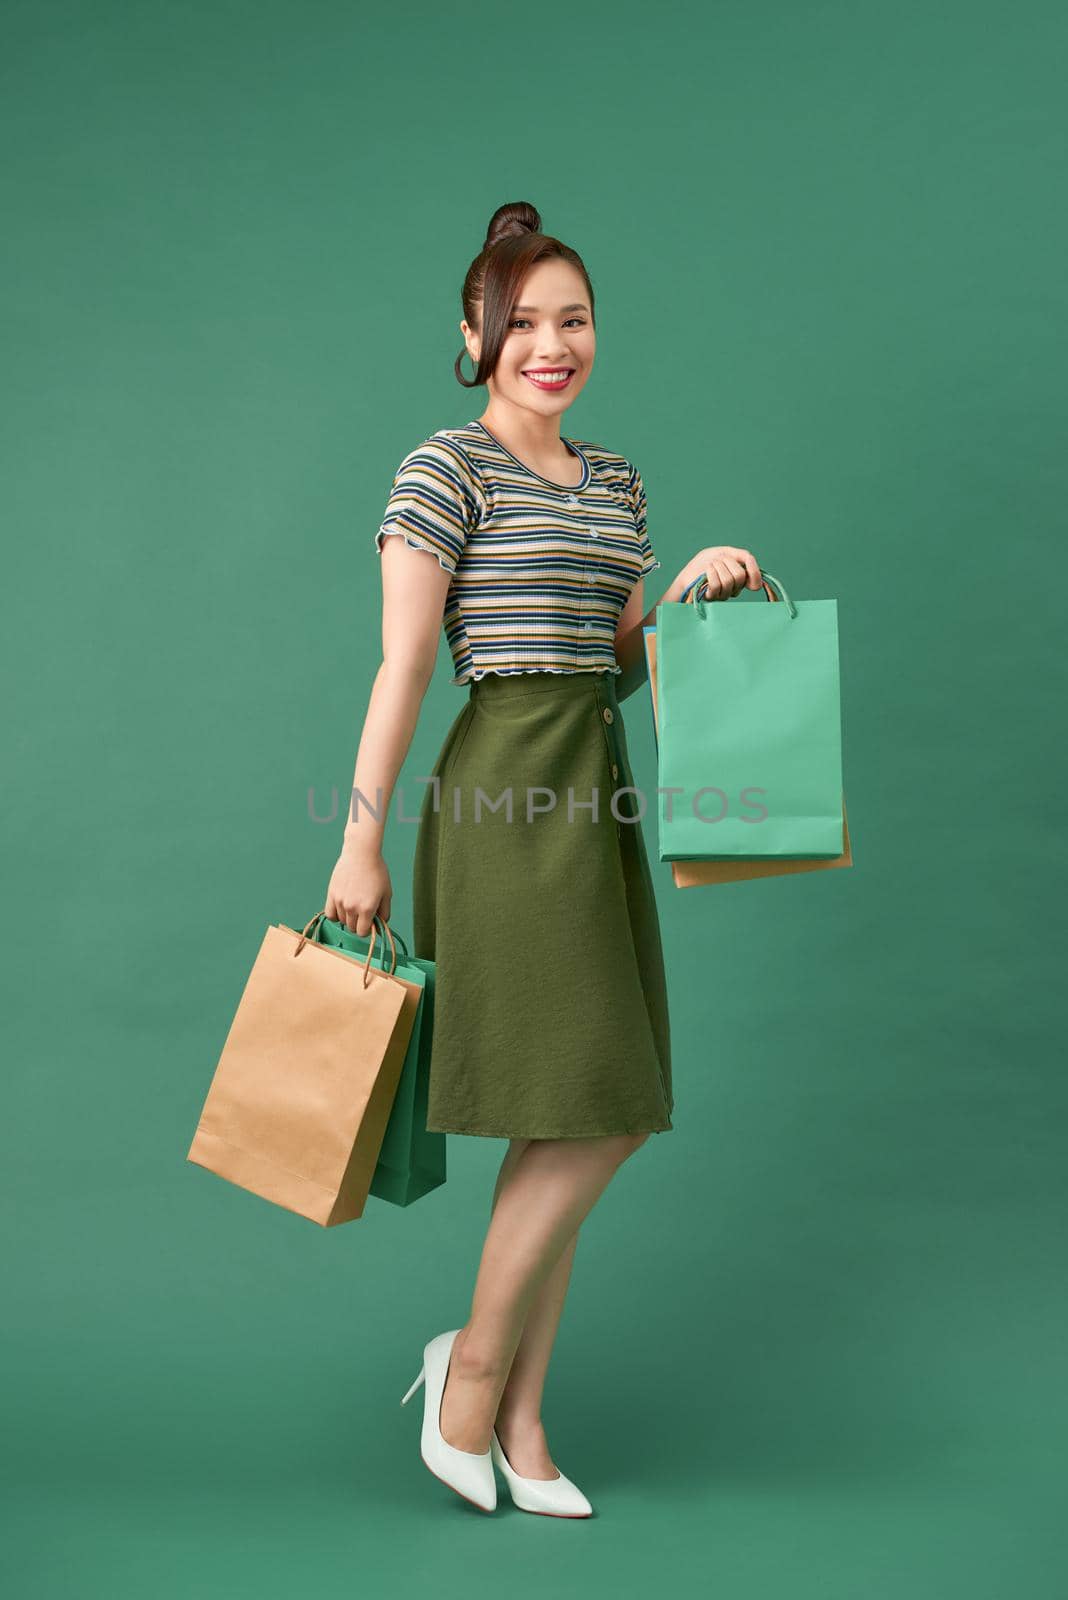 full length view of cheerful, fashionable woman holding shopping bags and smiling on green background